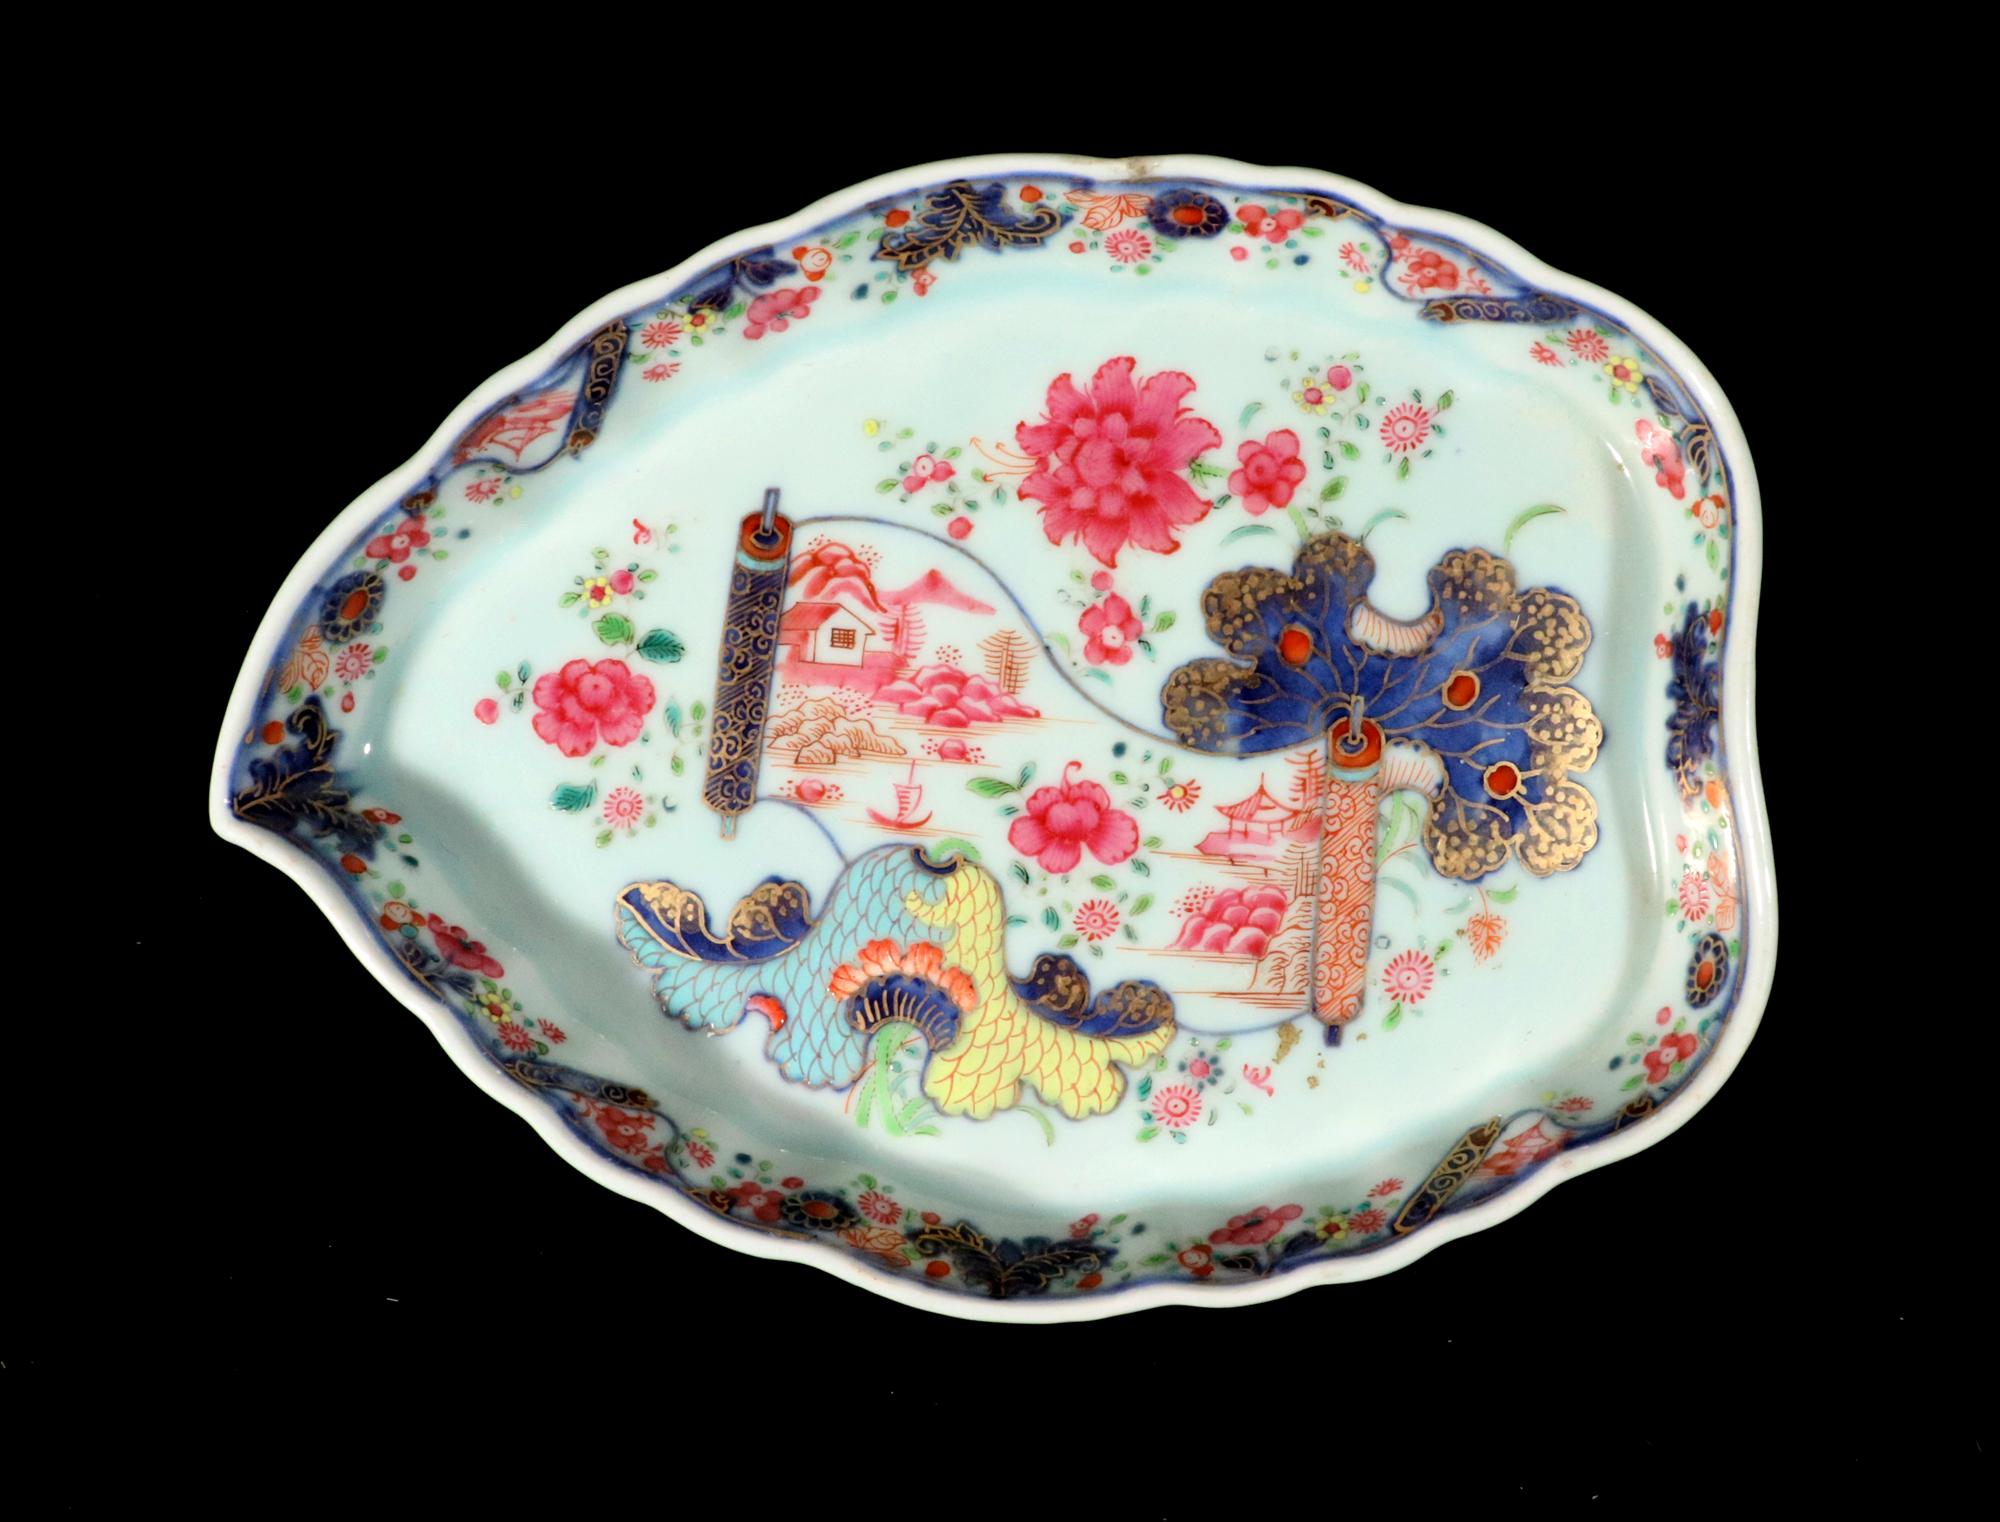 Chinese Export Porcelain Pseudo Tobacco Leaf Shaped Dish,
Circa 1765

The Chinese Export porcelain shaped dish.  The leaf-shaped dish is in a rare pattern.  The leaves in a tobacco leaf color with the center with an unfolding scroll depicting a